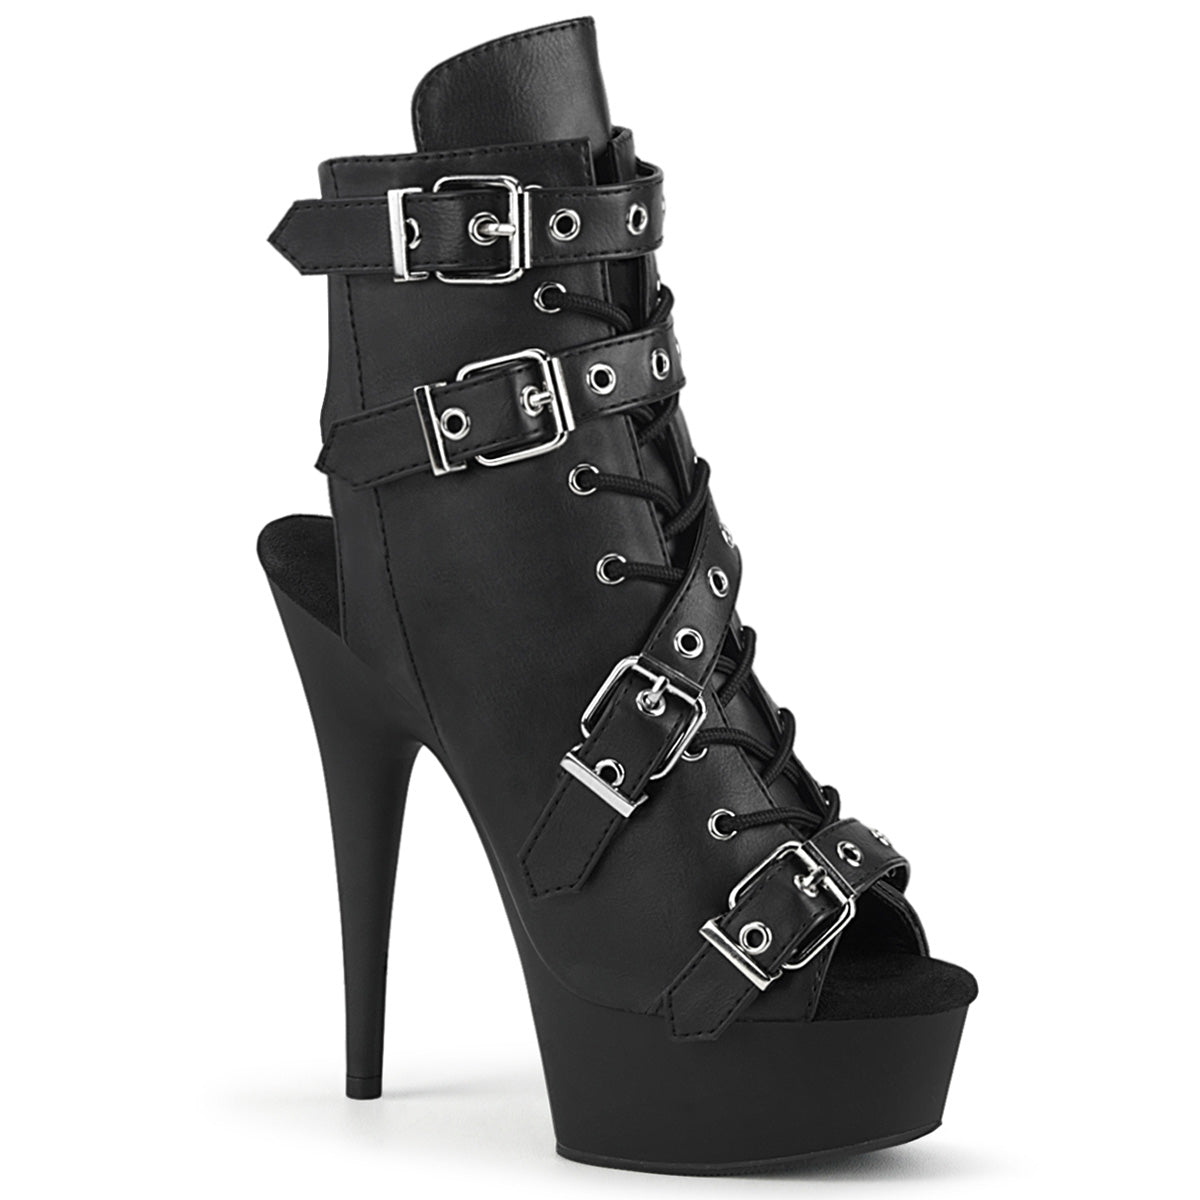 DELIGHT-600-19 Black Ankle Boots